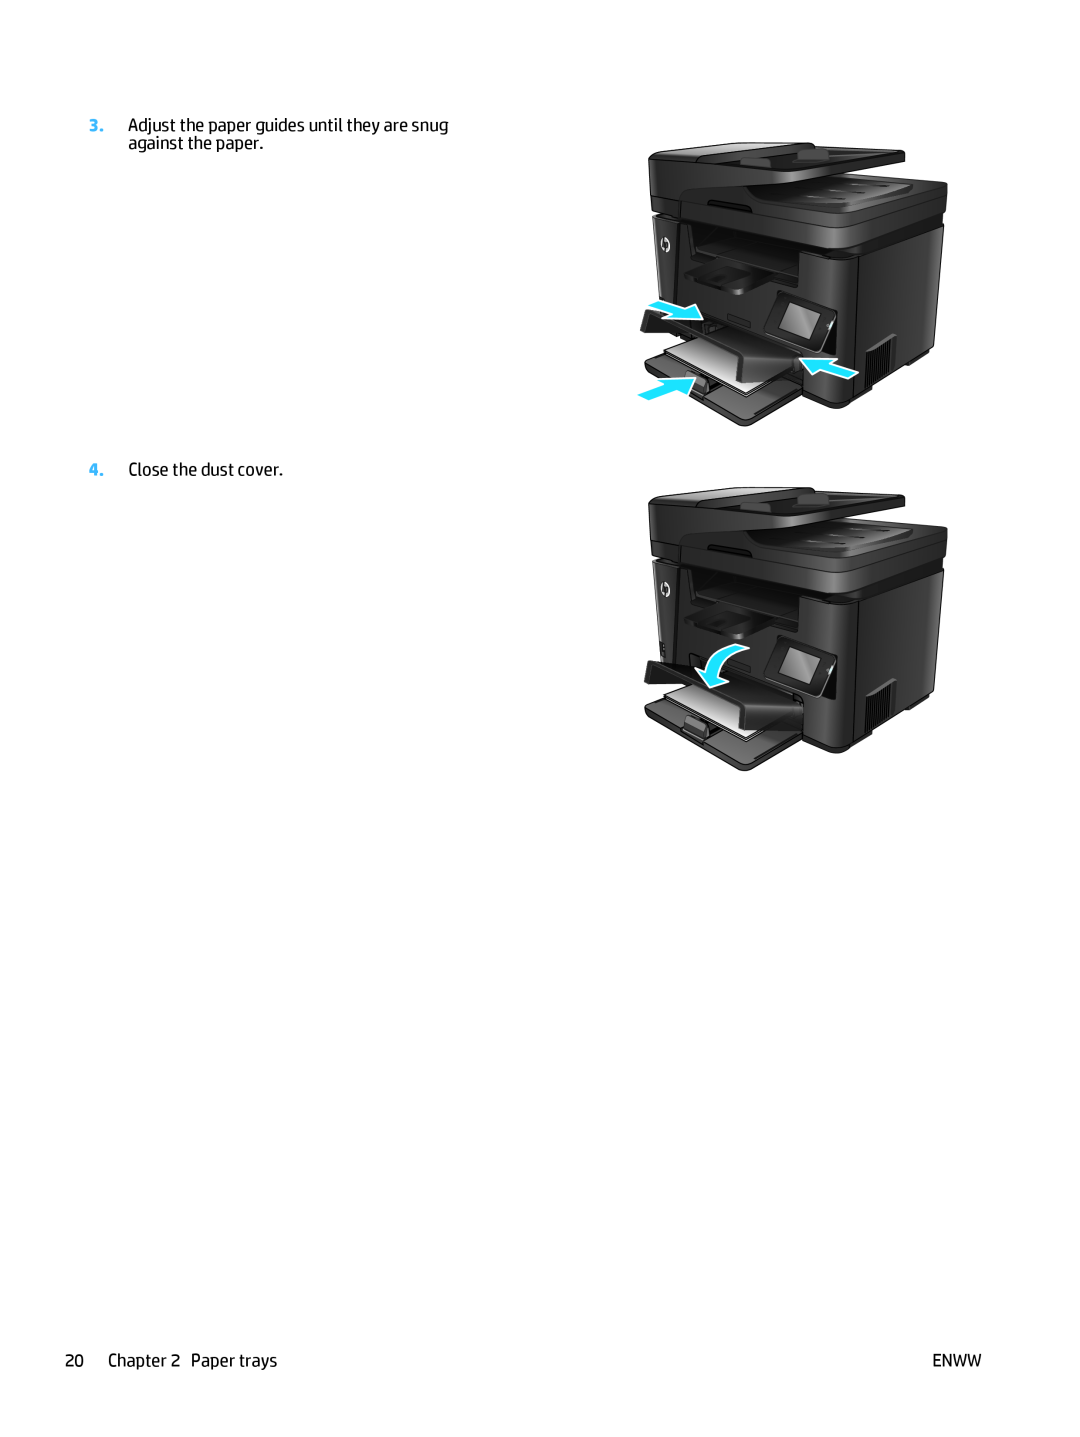 HP MFP M225dn manual Adjust the paper guides until they are snug against the paper, Close the dust cover, Paper trays, Enww 